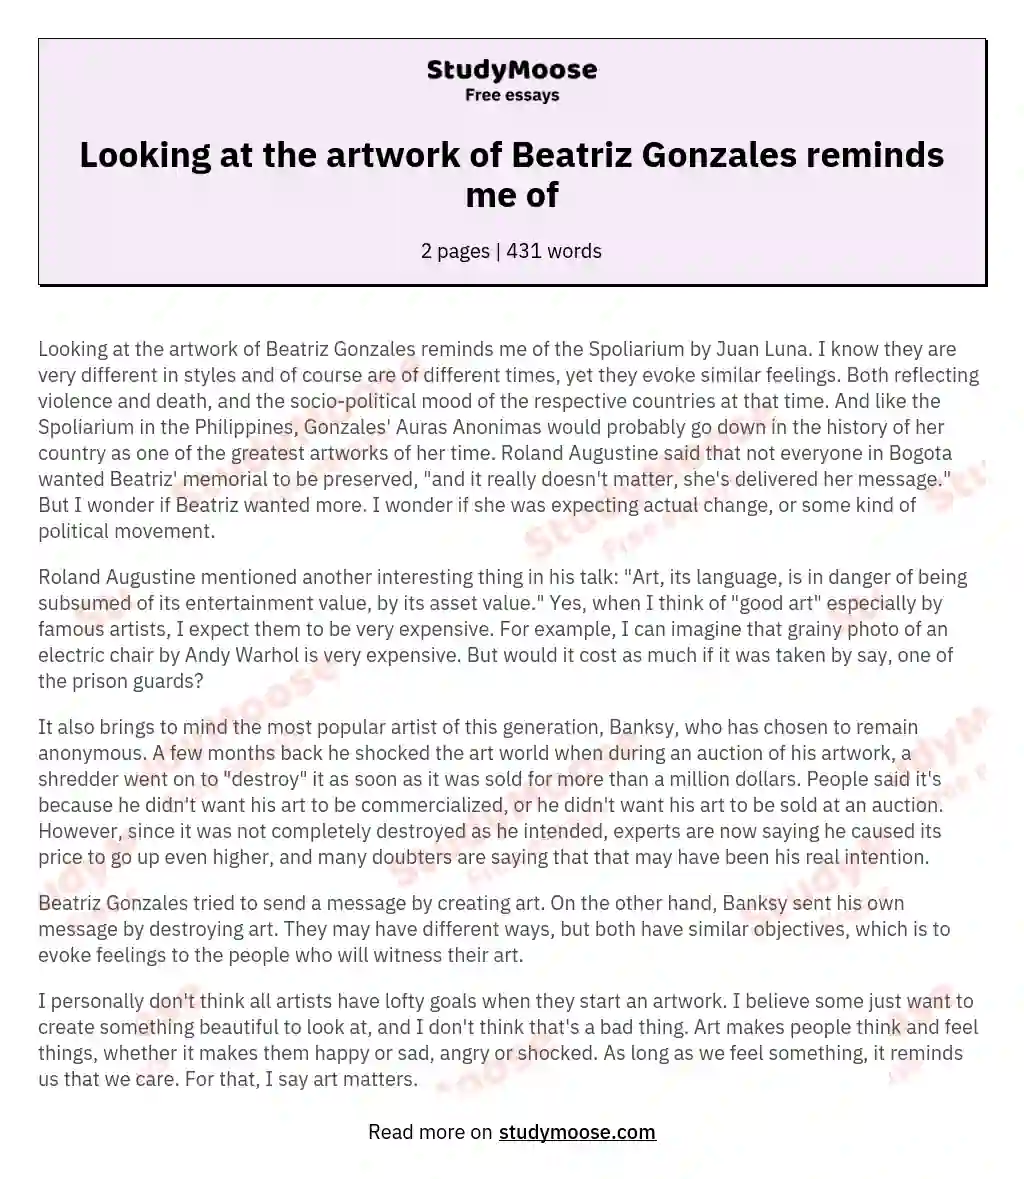 Looking at the artwork of Beatriz Gonzales reminds me of essay